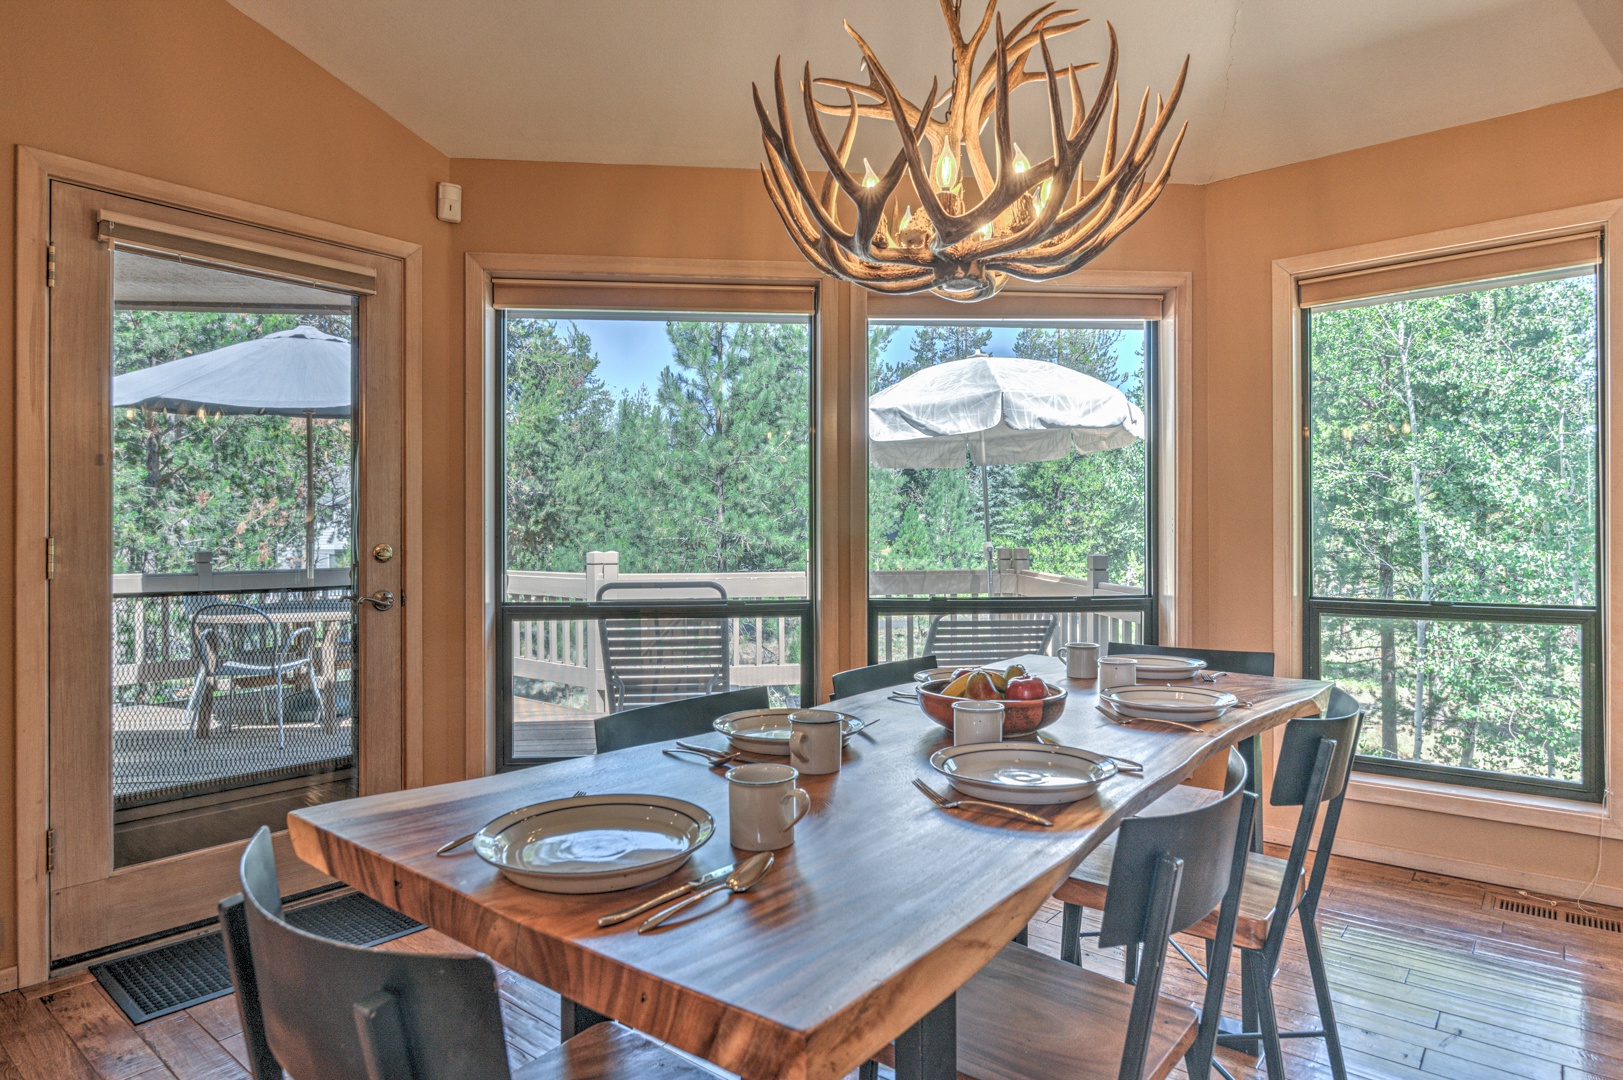 Dining room with Exterior views of the back porch